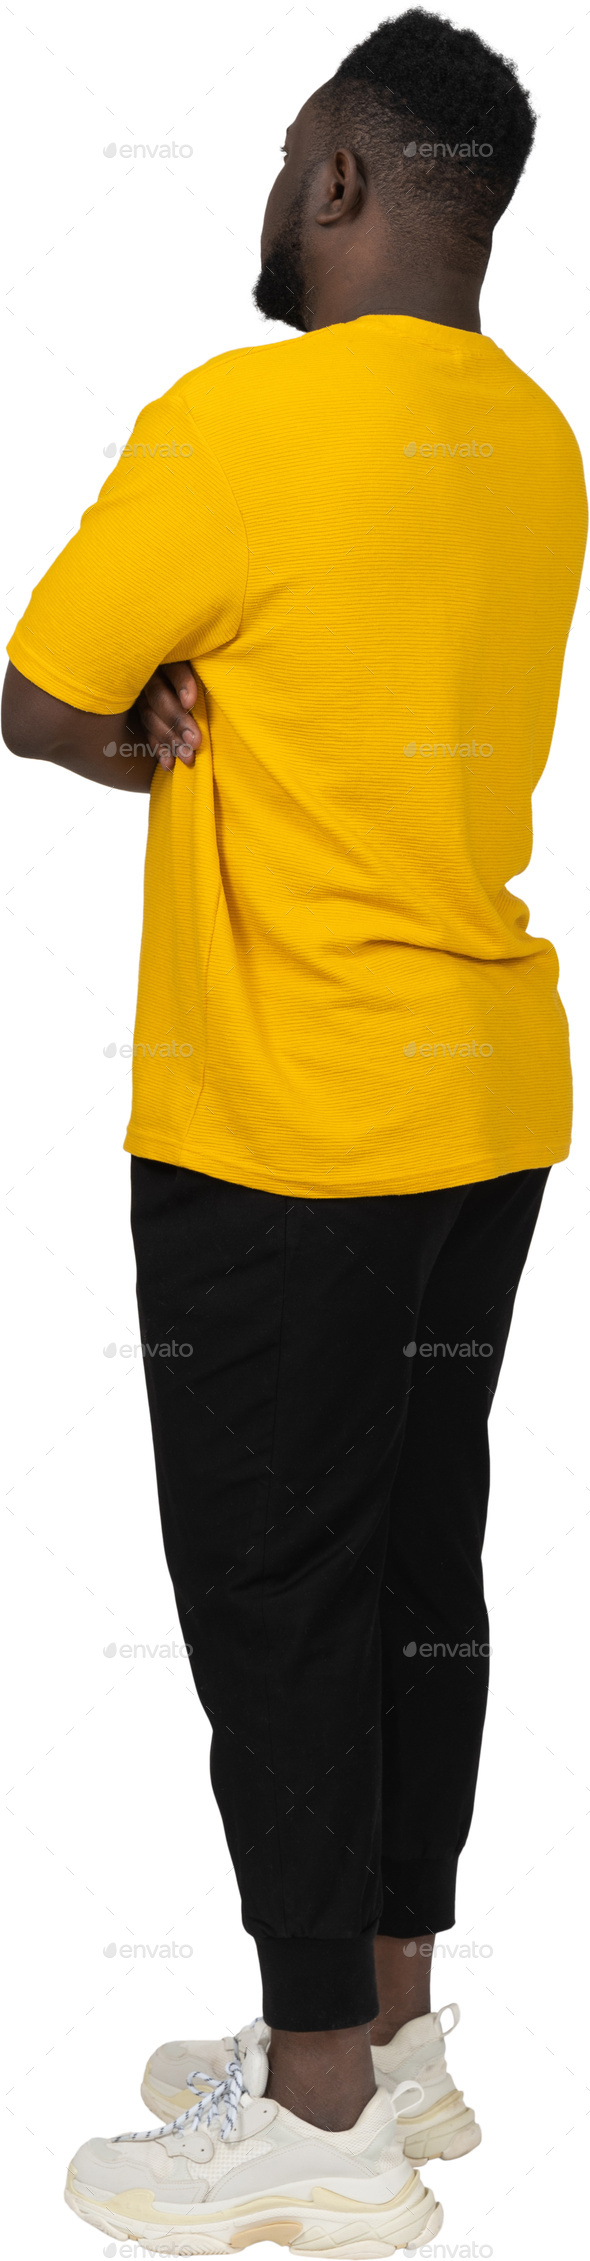 What color of shirt goes well with black and yellow striped pants? - Quora